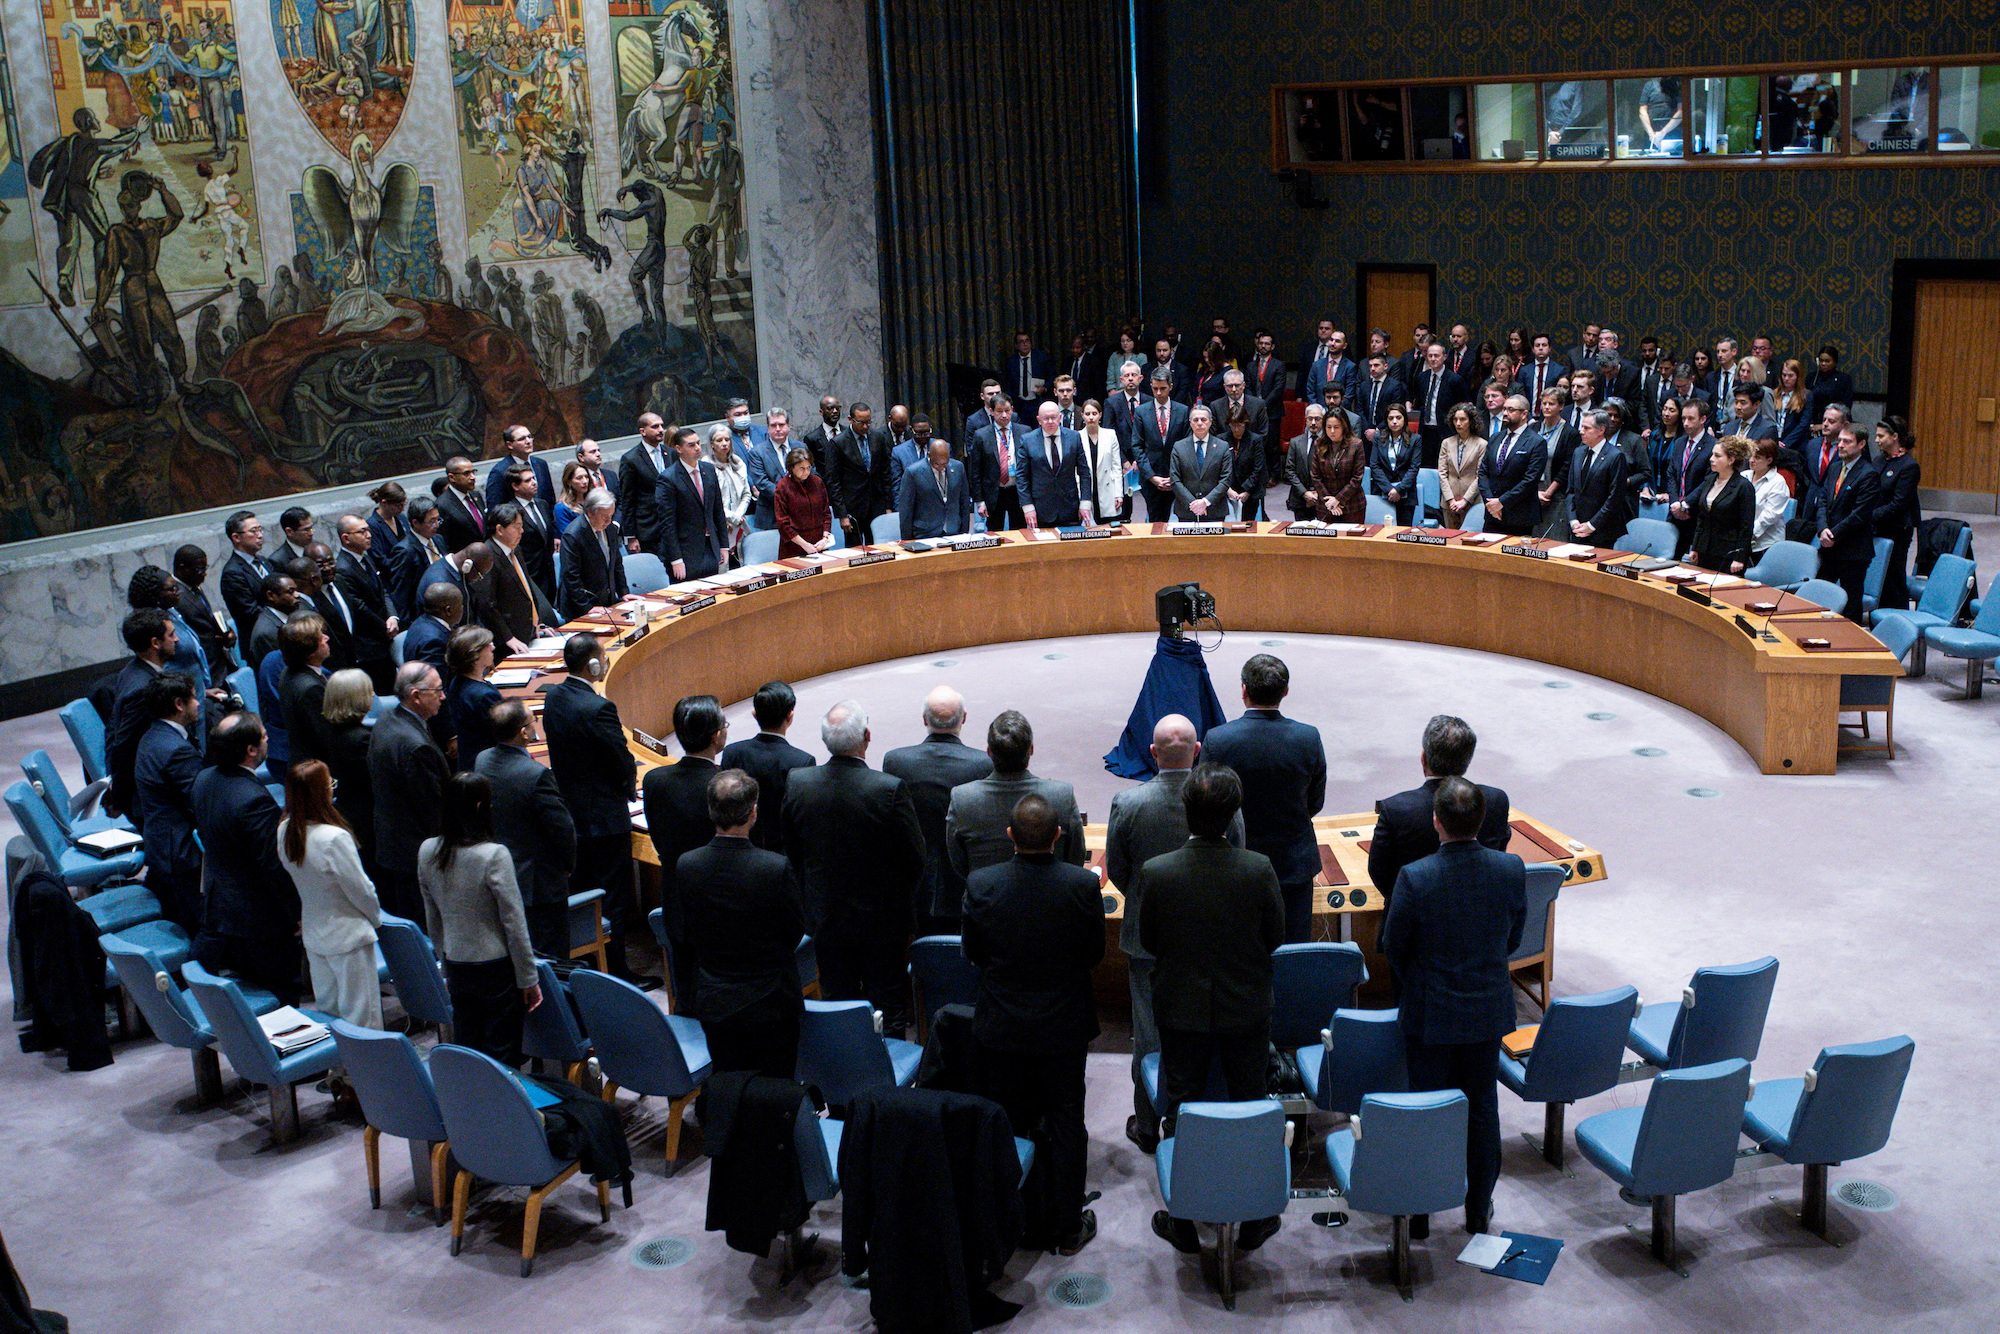 Representatives observe a minute of silence during a meeting at the United Nations Security Council at UN headquarters on February 24.